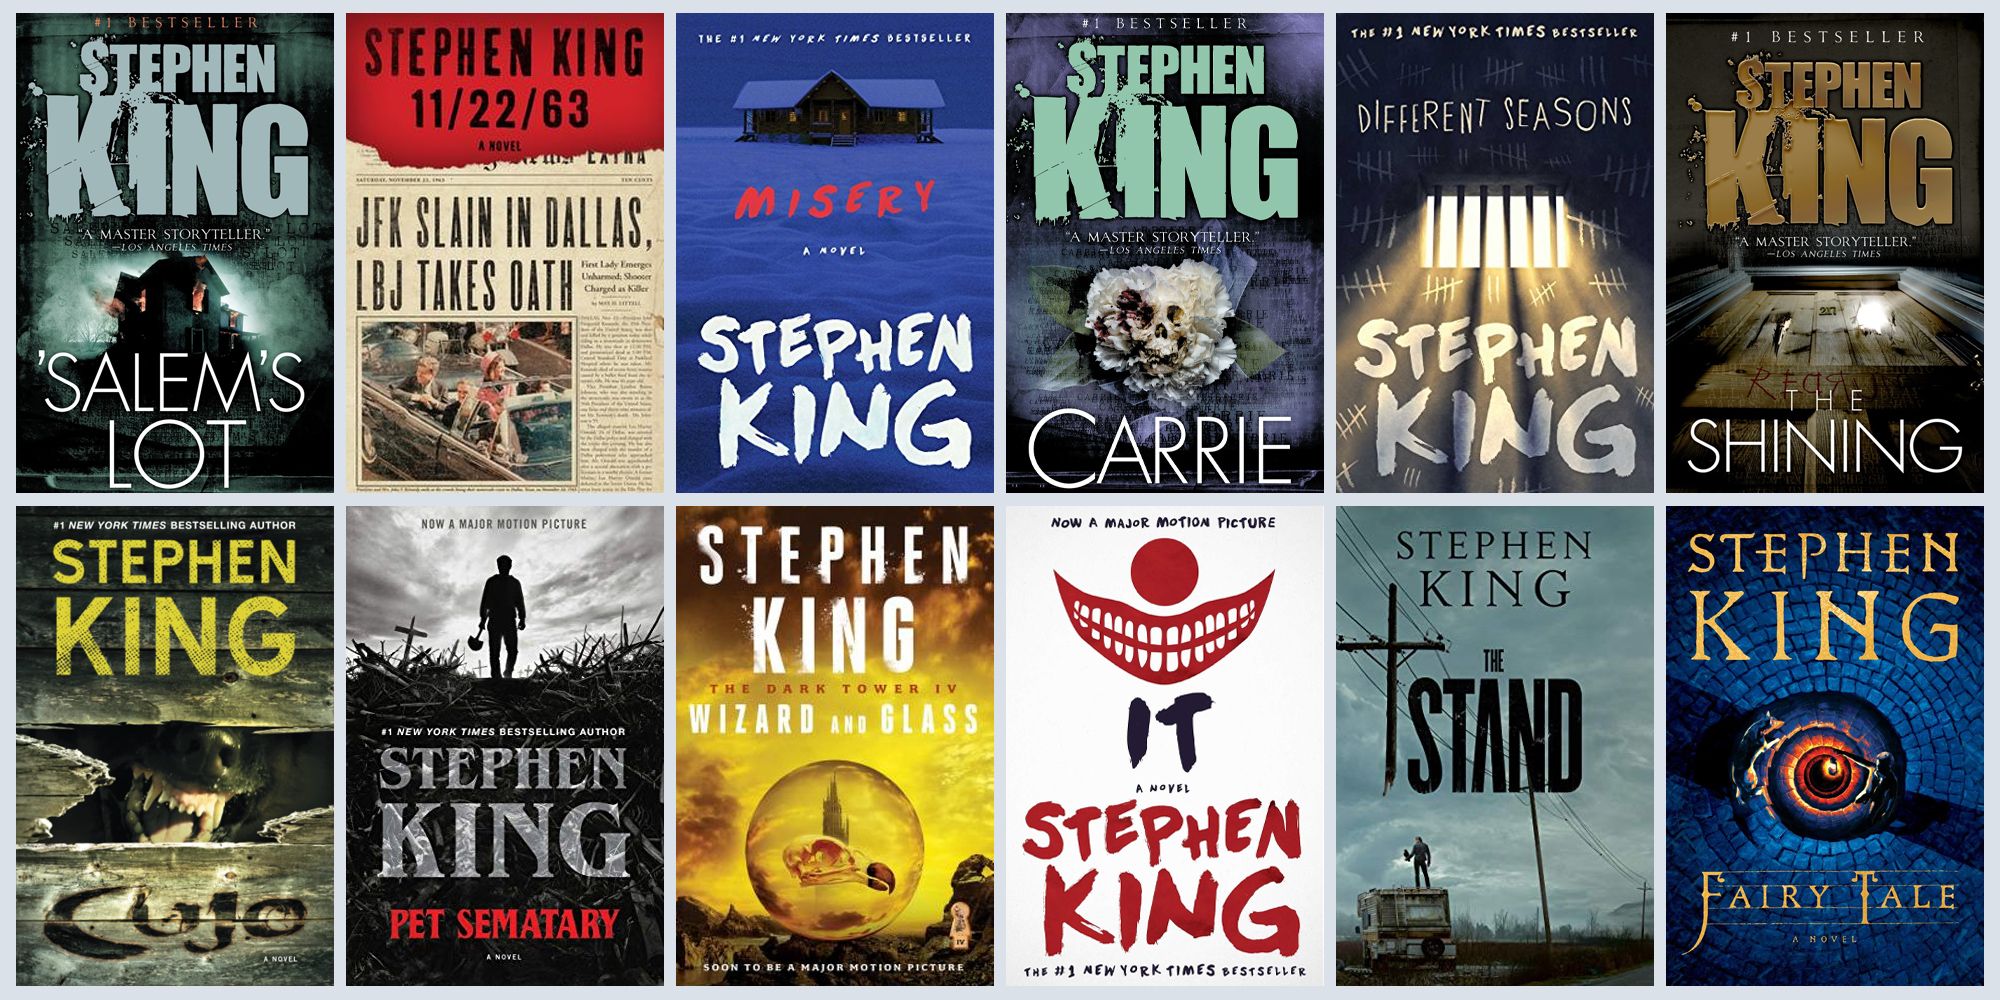 What is Stephen King's most sold book?